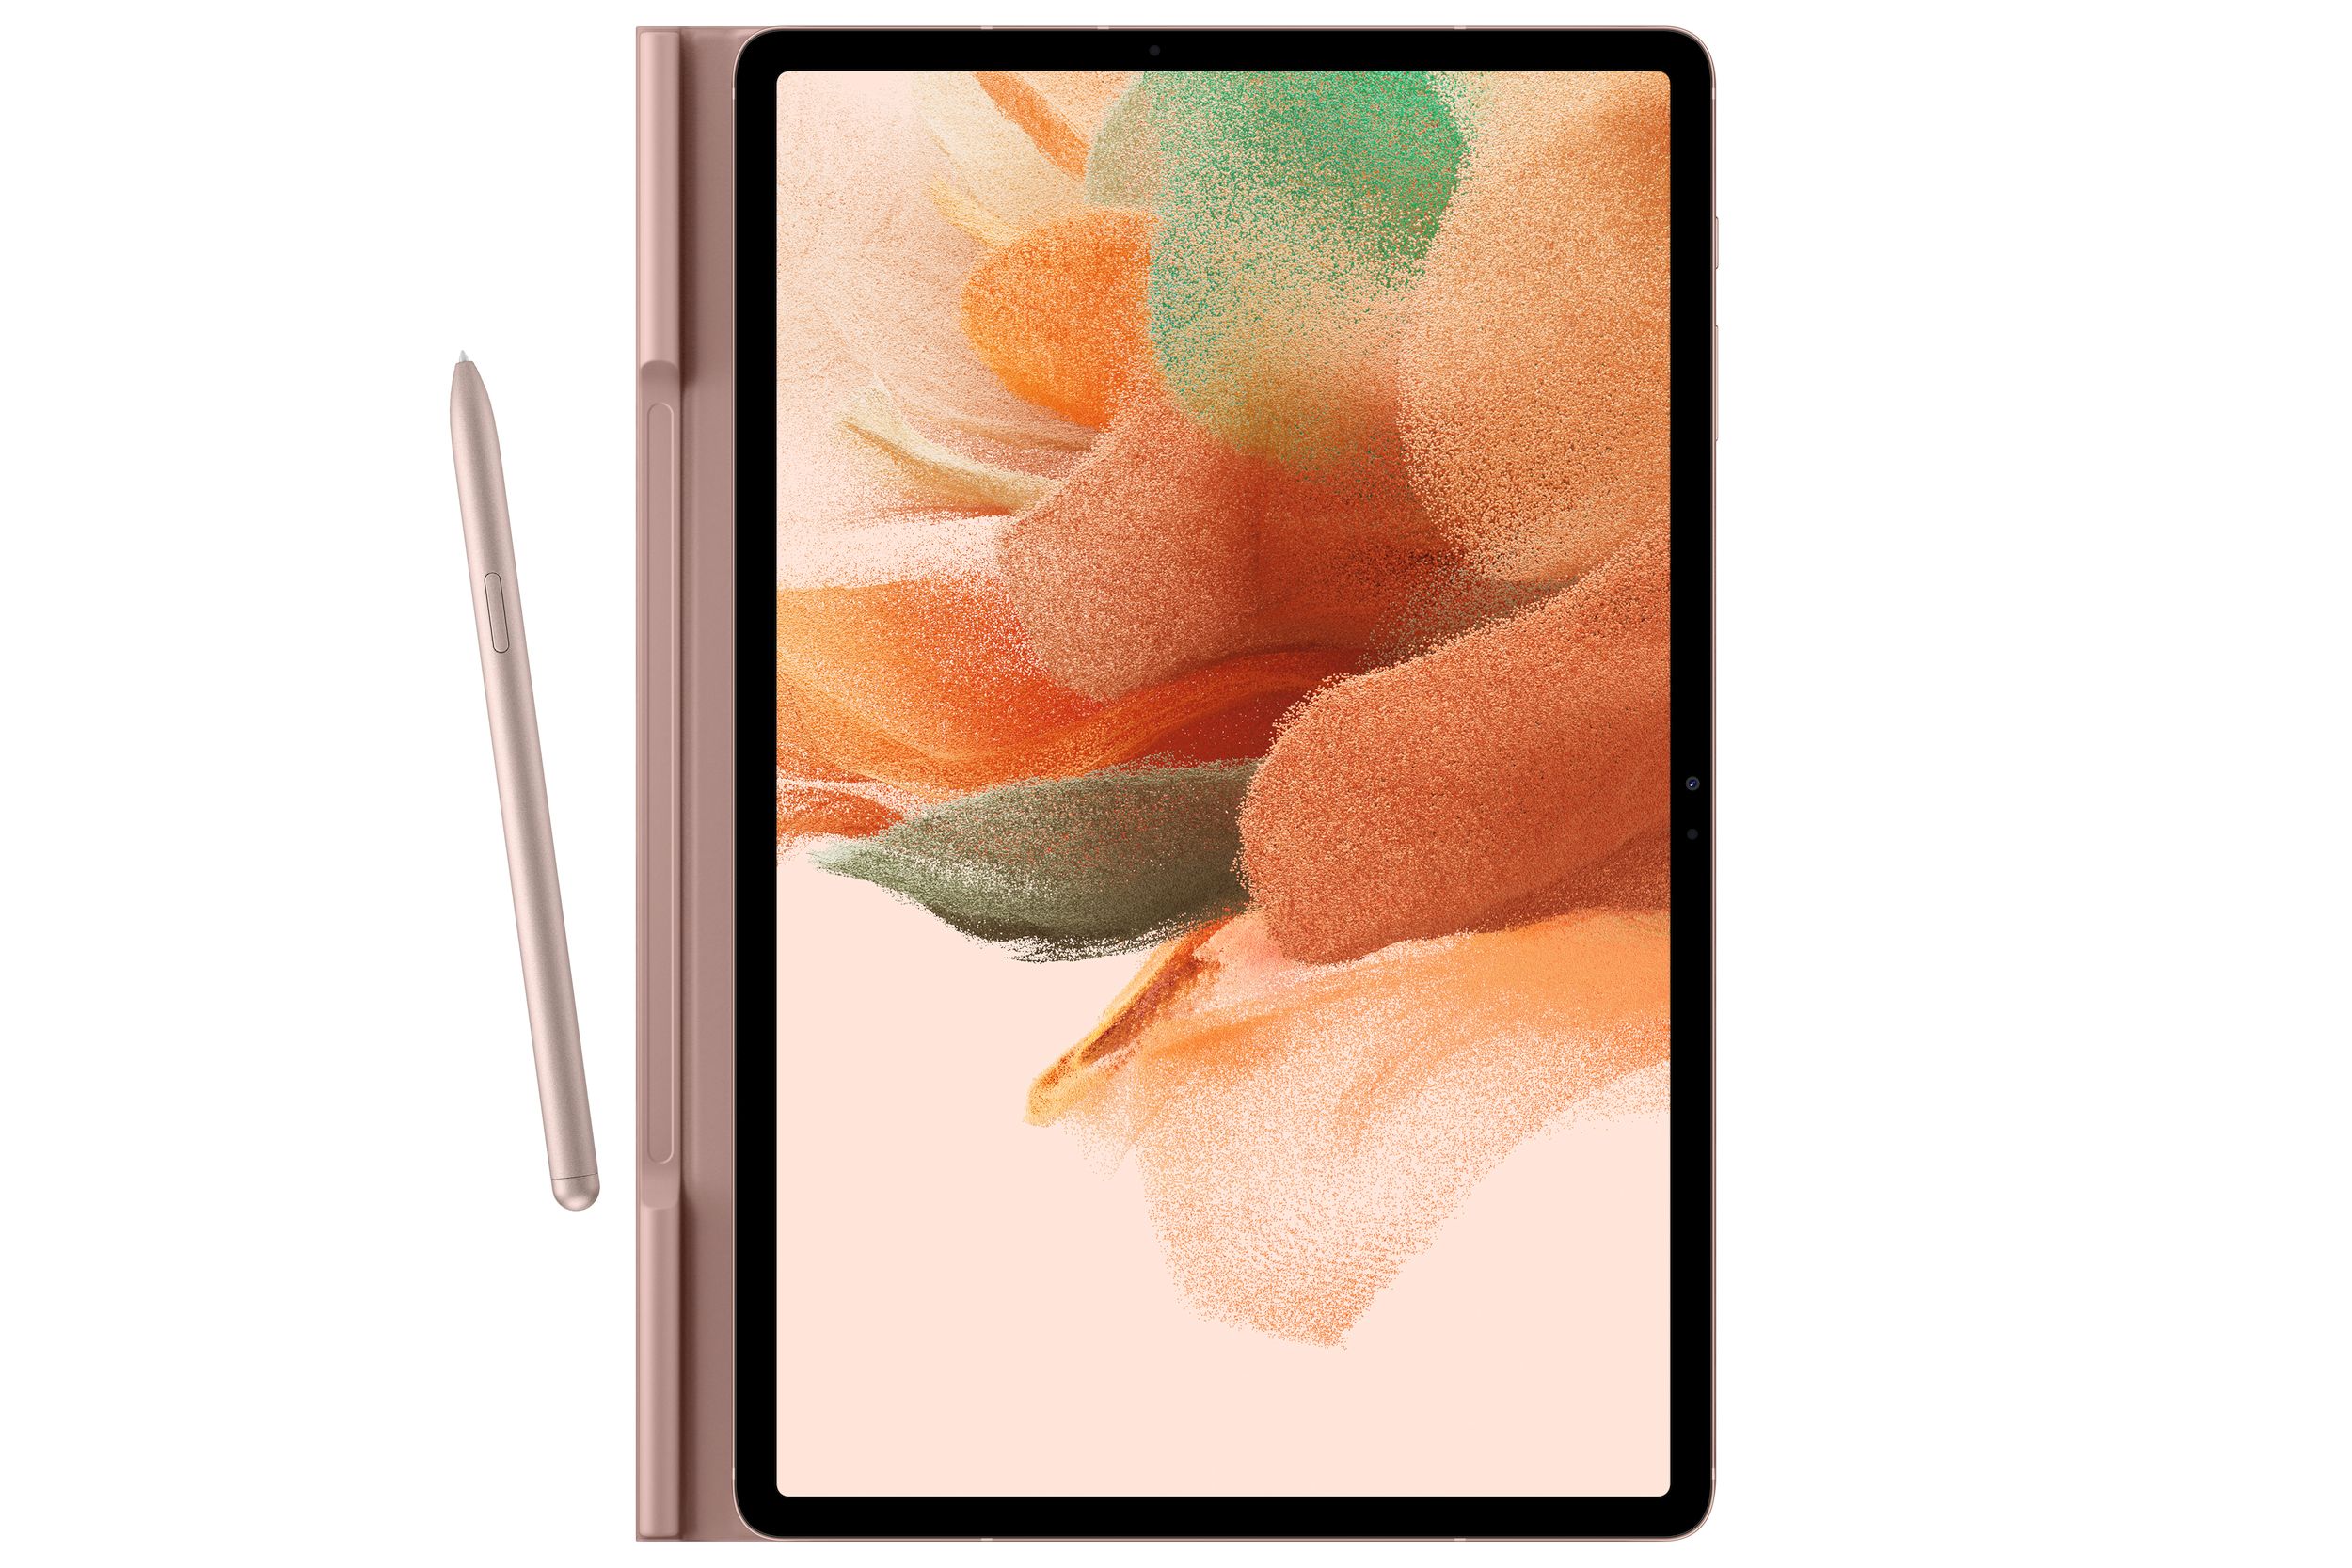 Samsung’s upcoming tablet will not be called Galaxy Tab S7+ Lite